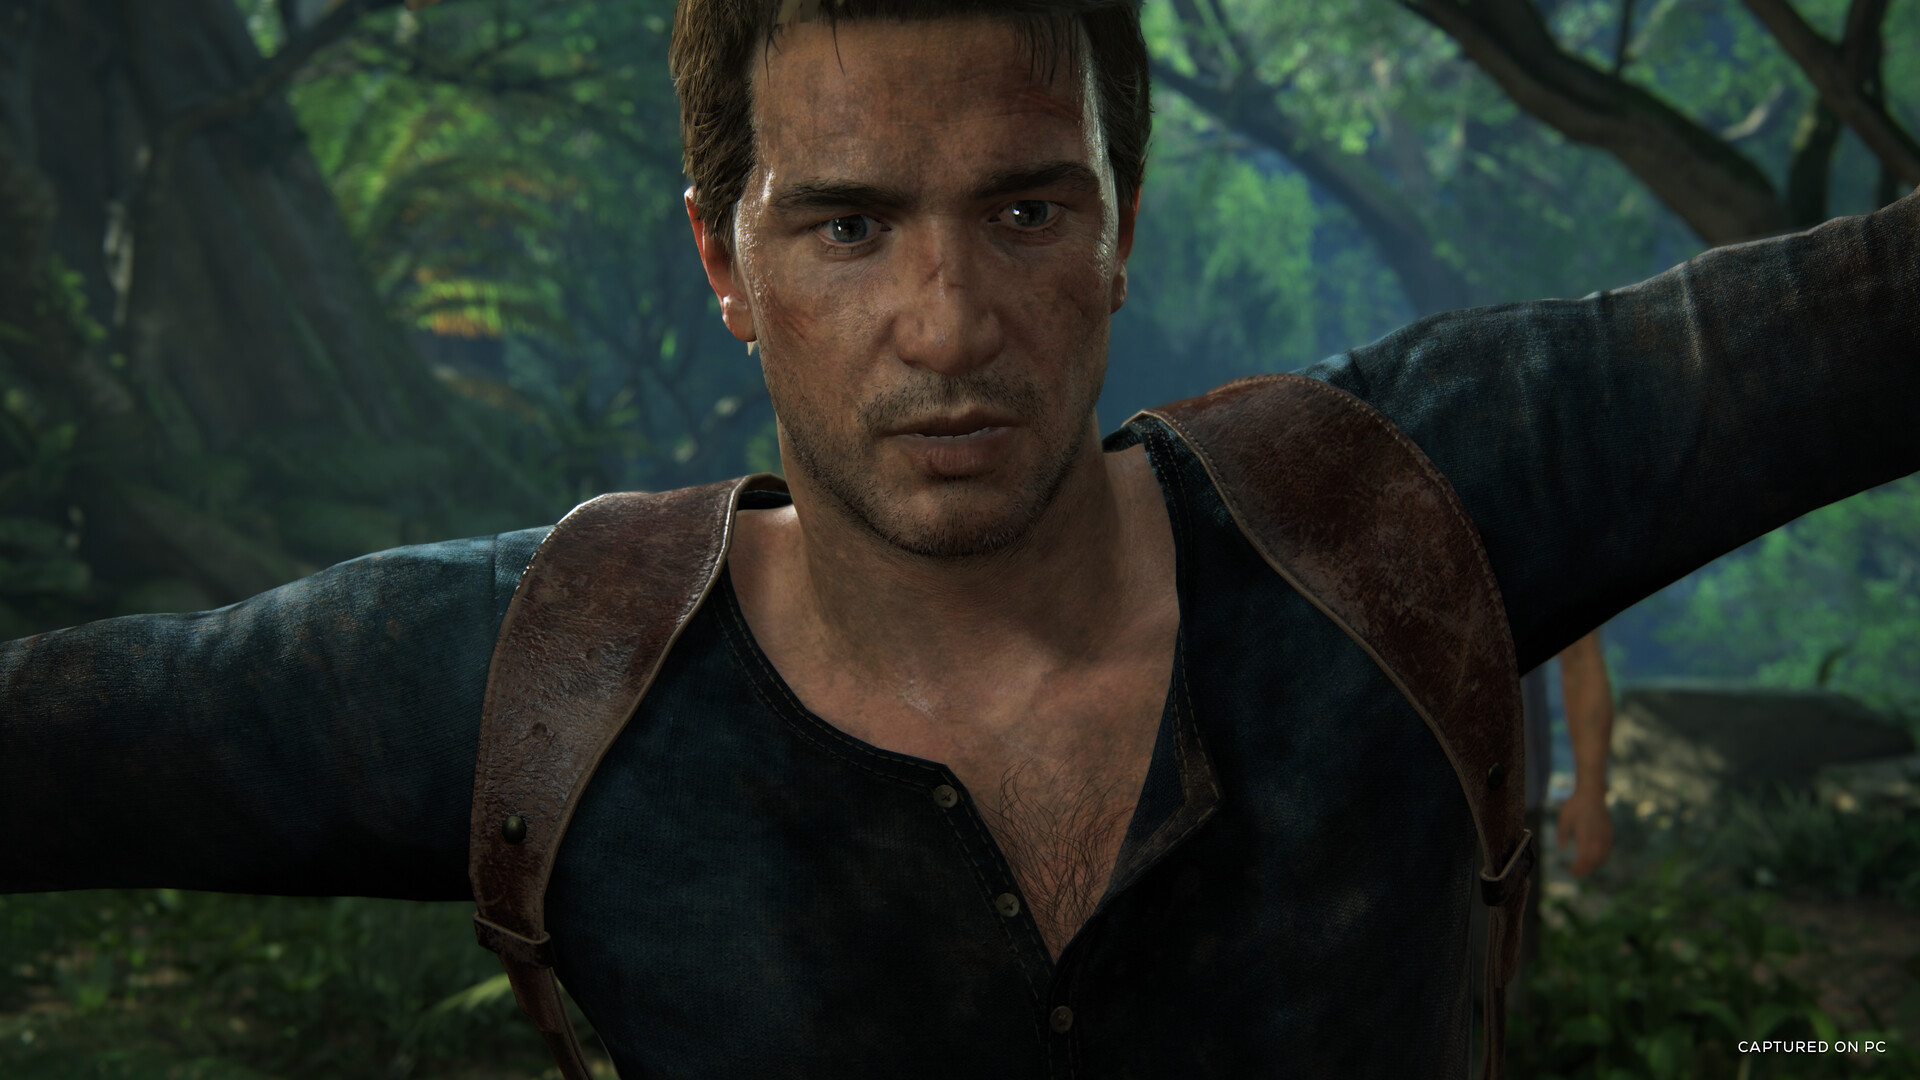 Jogo Uncharted Para Pc Game